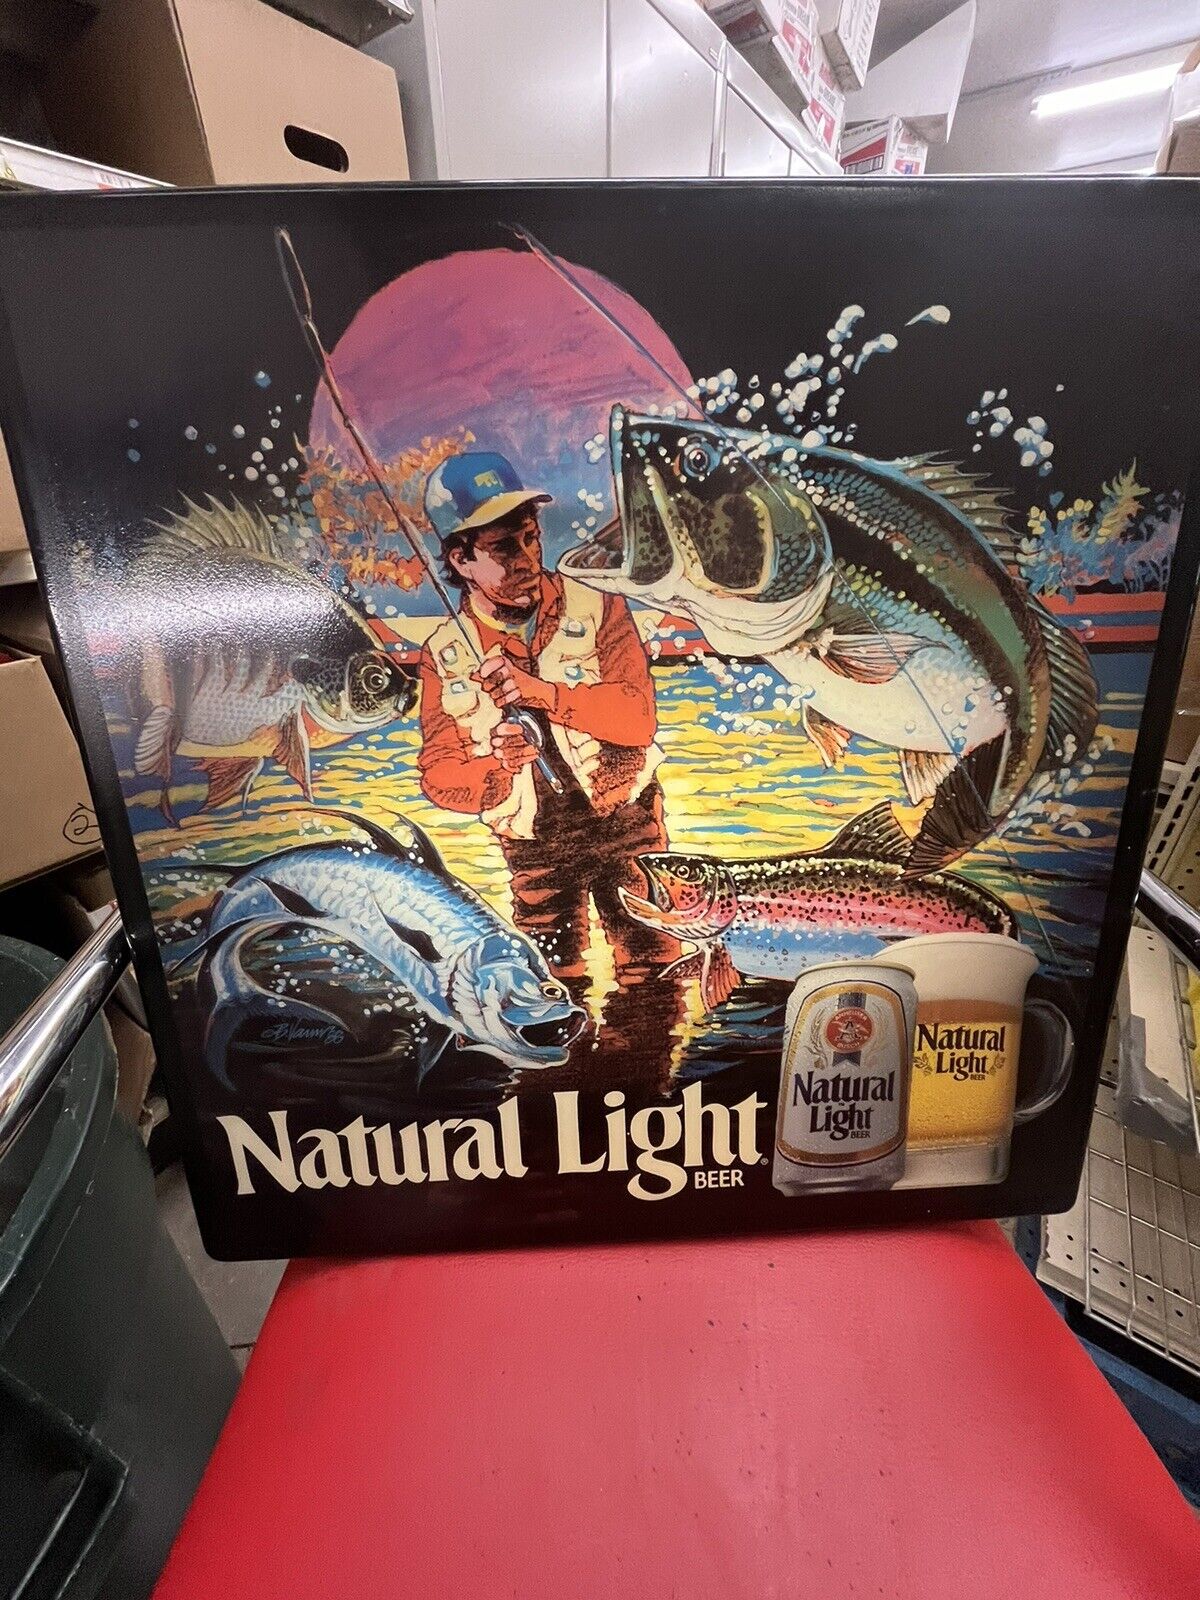 VTG 88 BUD NATURAL LIGHT BEER BASS TROUT FISHING FISH FRY IN MOTION BAR SIGN